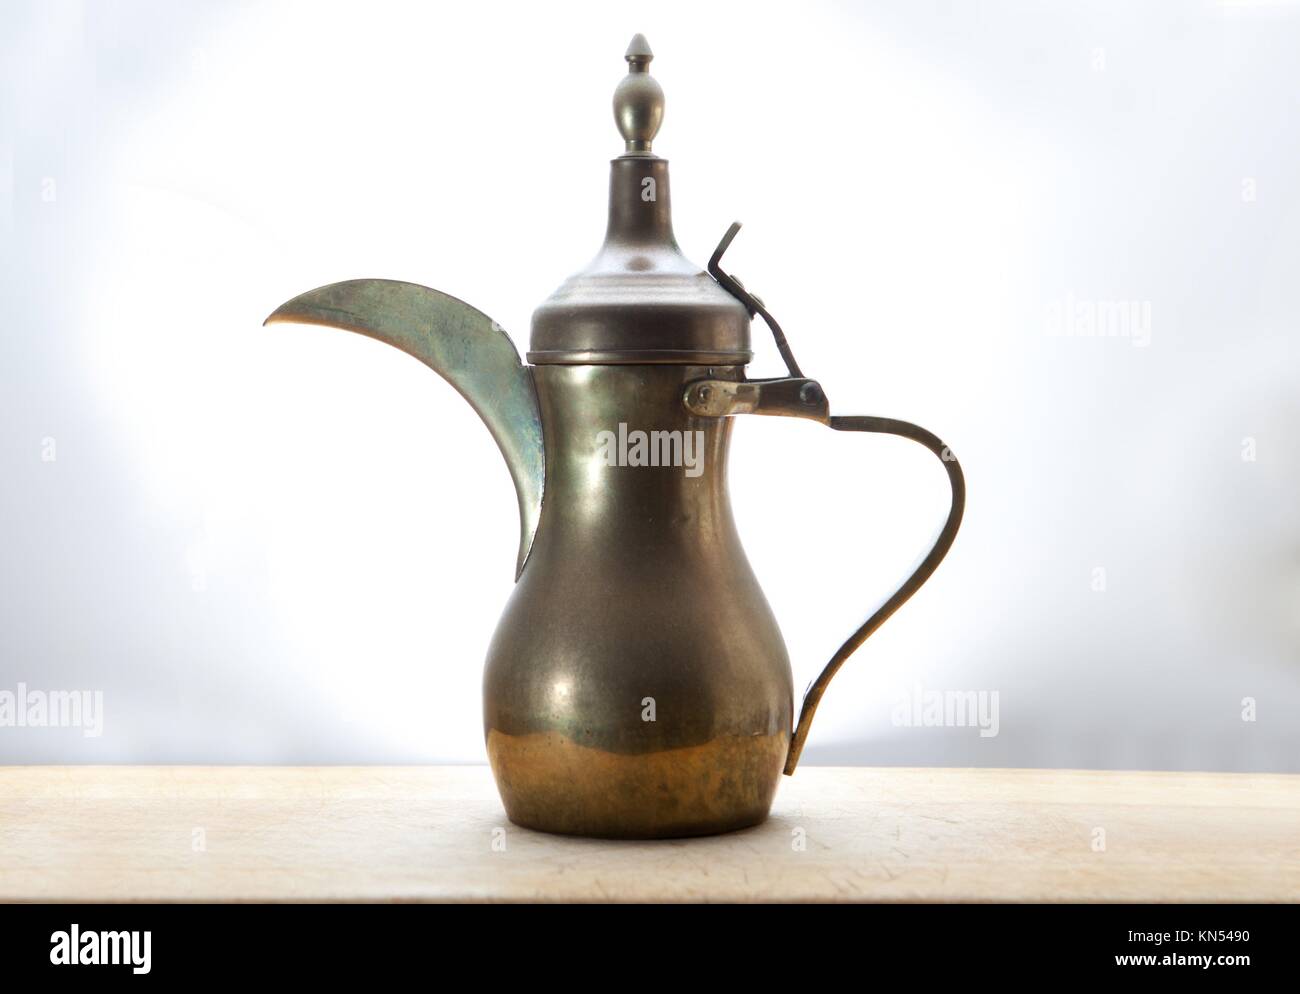 Old traditional arabic pitcher isolated over white background, placed on wooden surface. Stock Photo